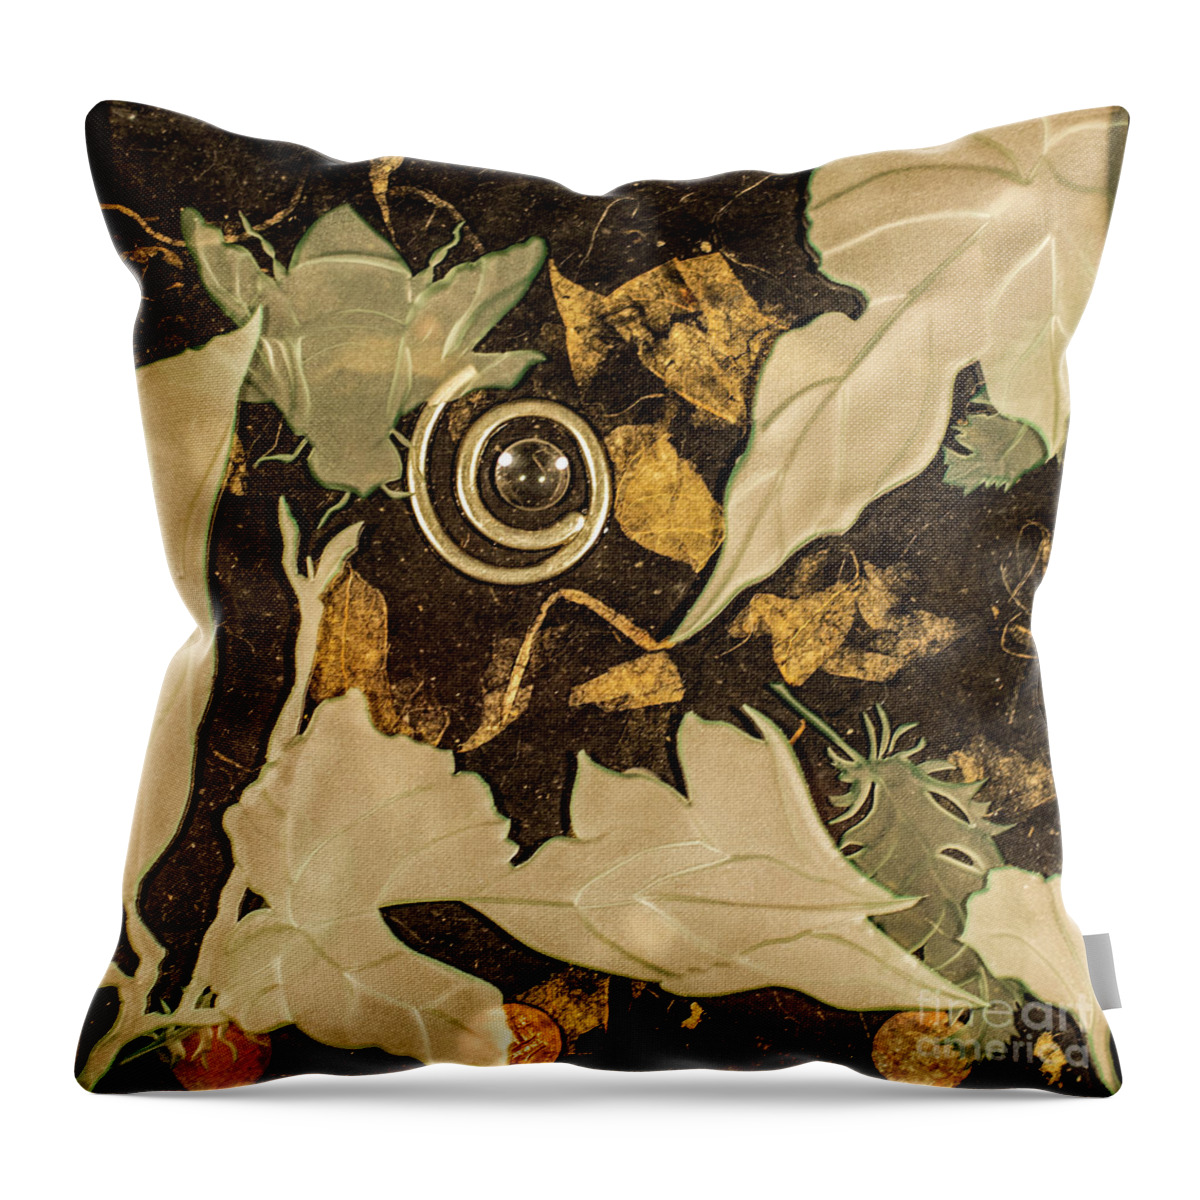 Bees Throw Pillow featuring the glass art Remembrance V by Alone Larsen